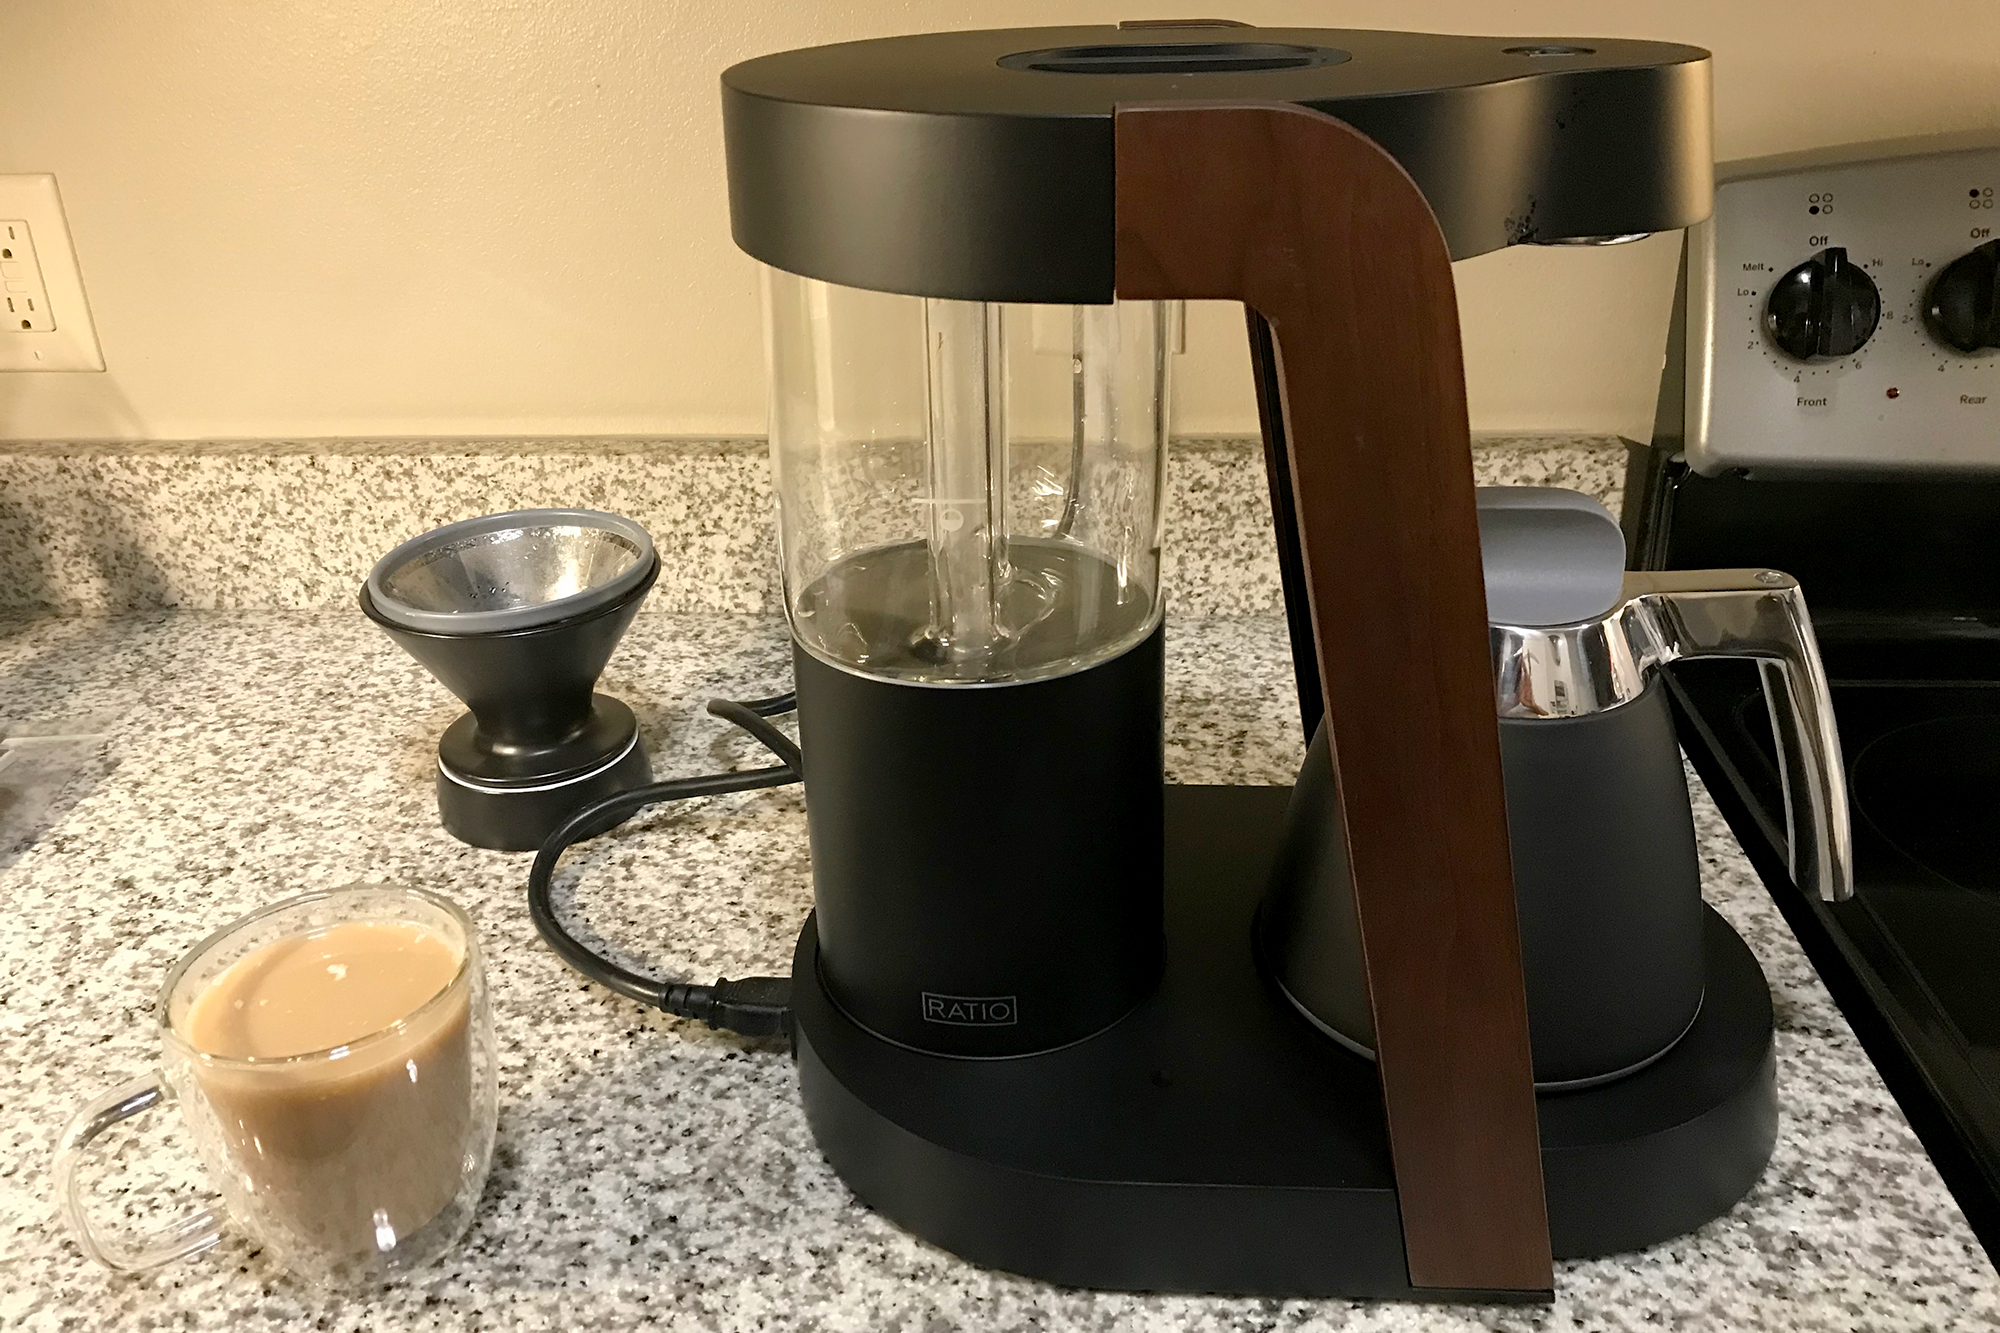 The Best Drip Coffee Makers for the Kitchen (Buyer's Guide) - Bob Vila